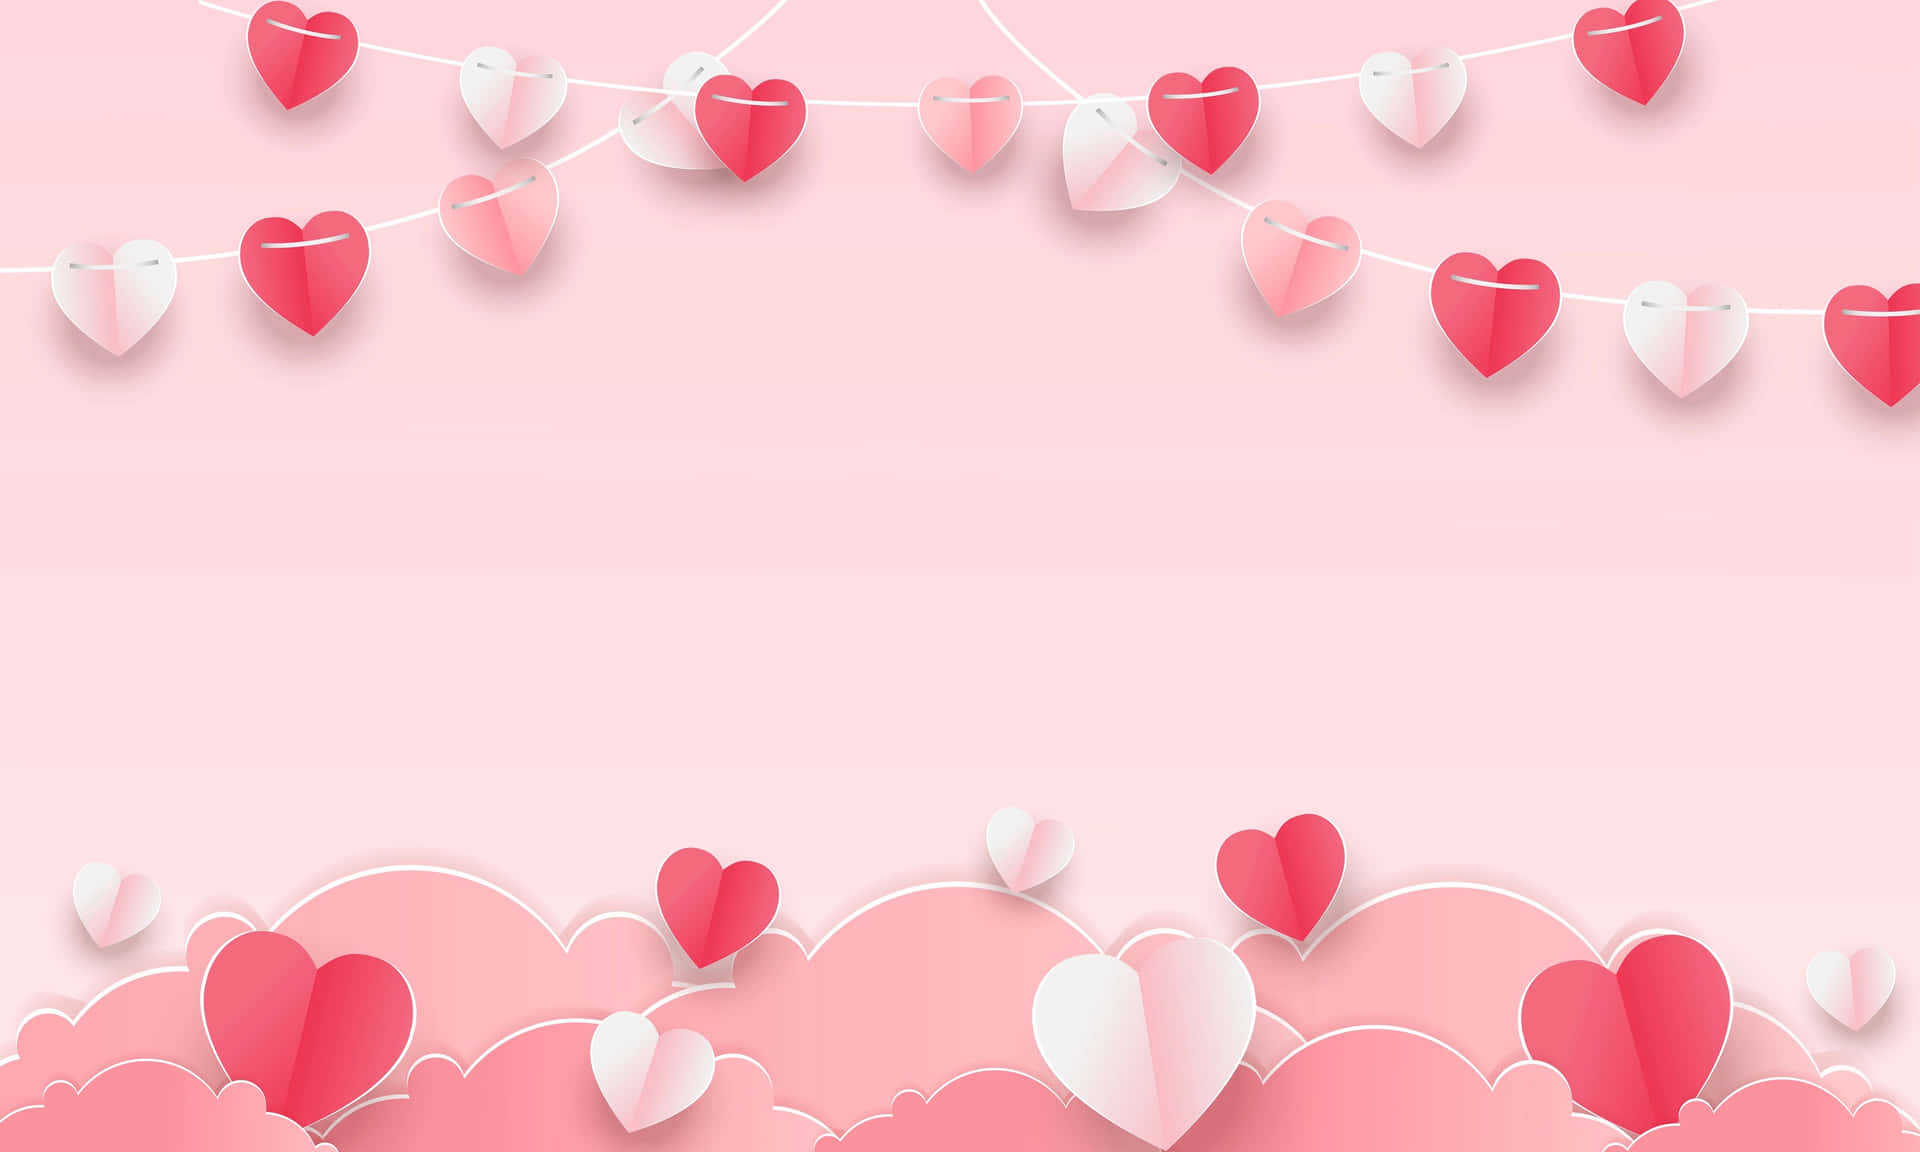 Adorable Heart Patterns Unleashing Love and Affection Wallpaper